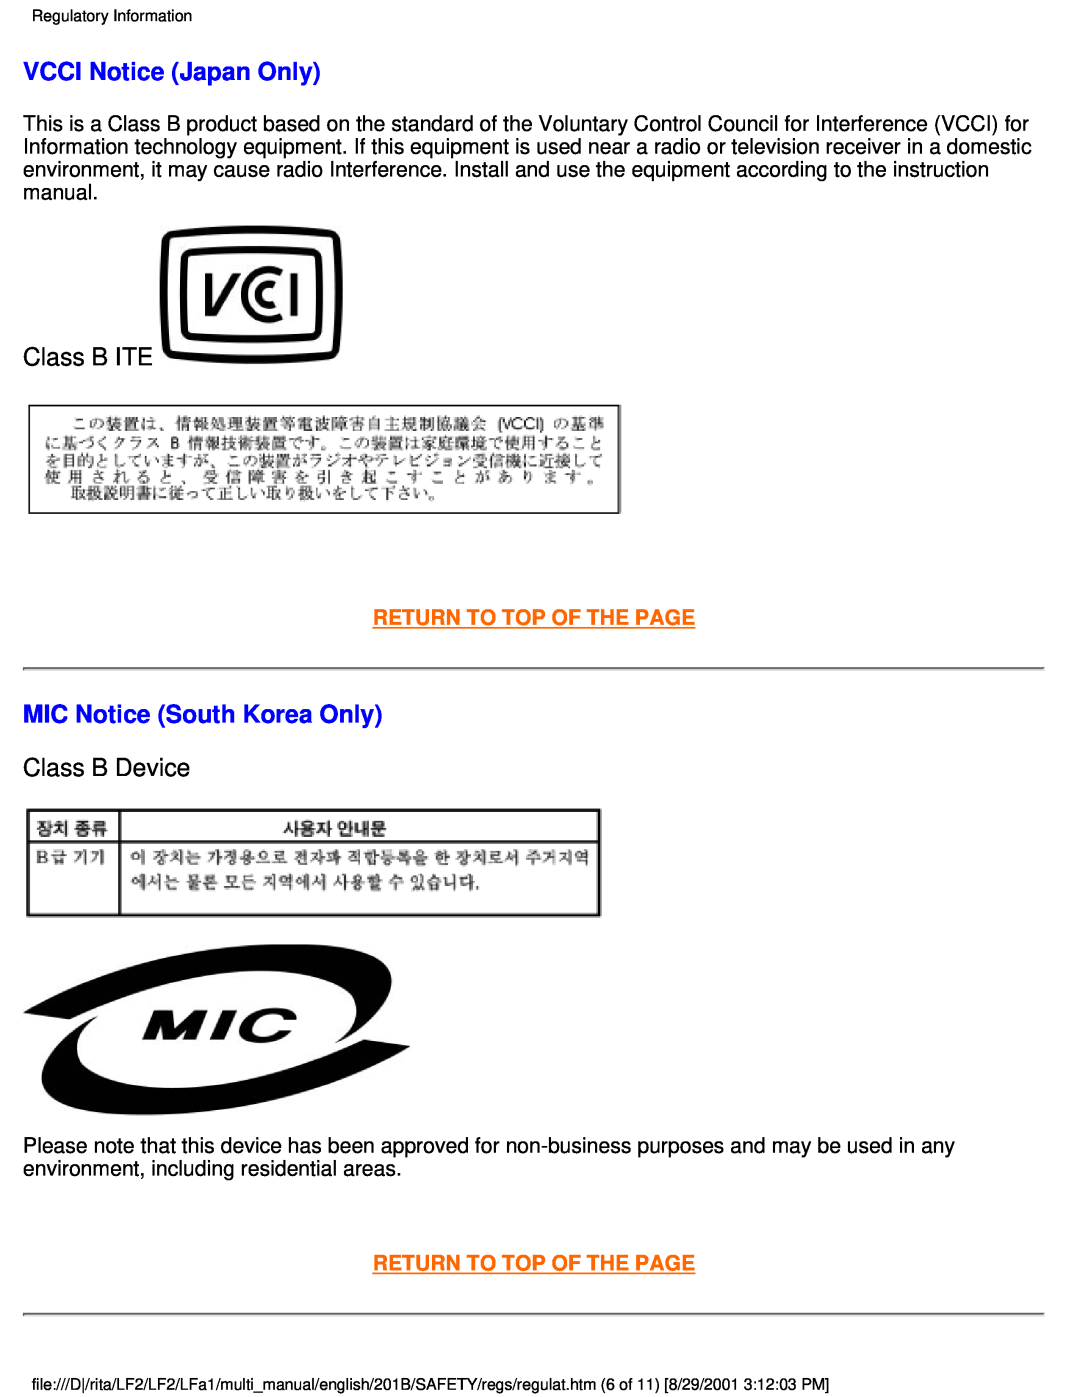 Philips 201B VCCI Notice Japan Only, MIC Notice South Korea Only, Class B ITE, Class B Device, Return To Top Of The Page 